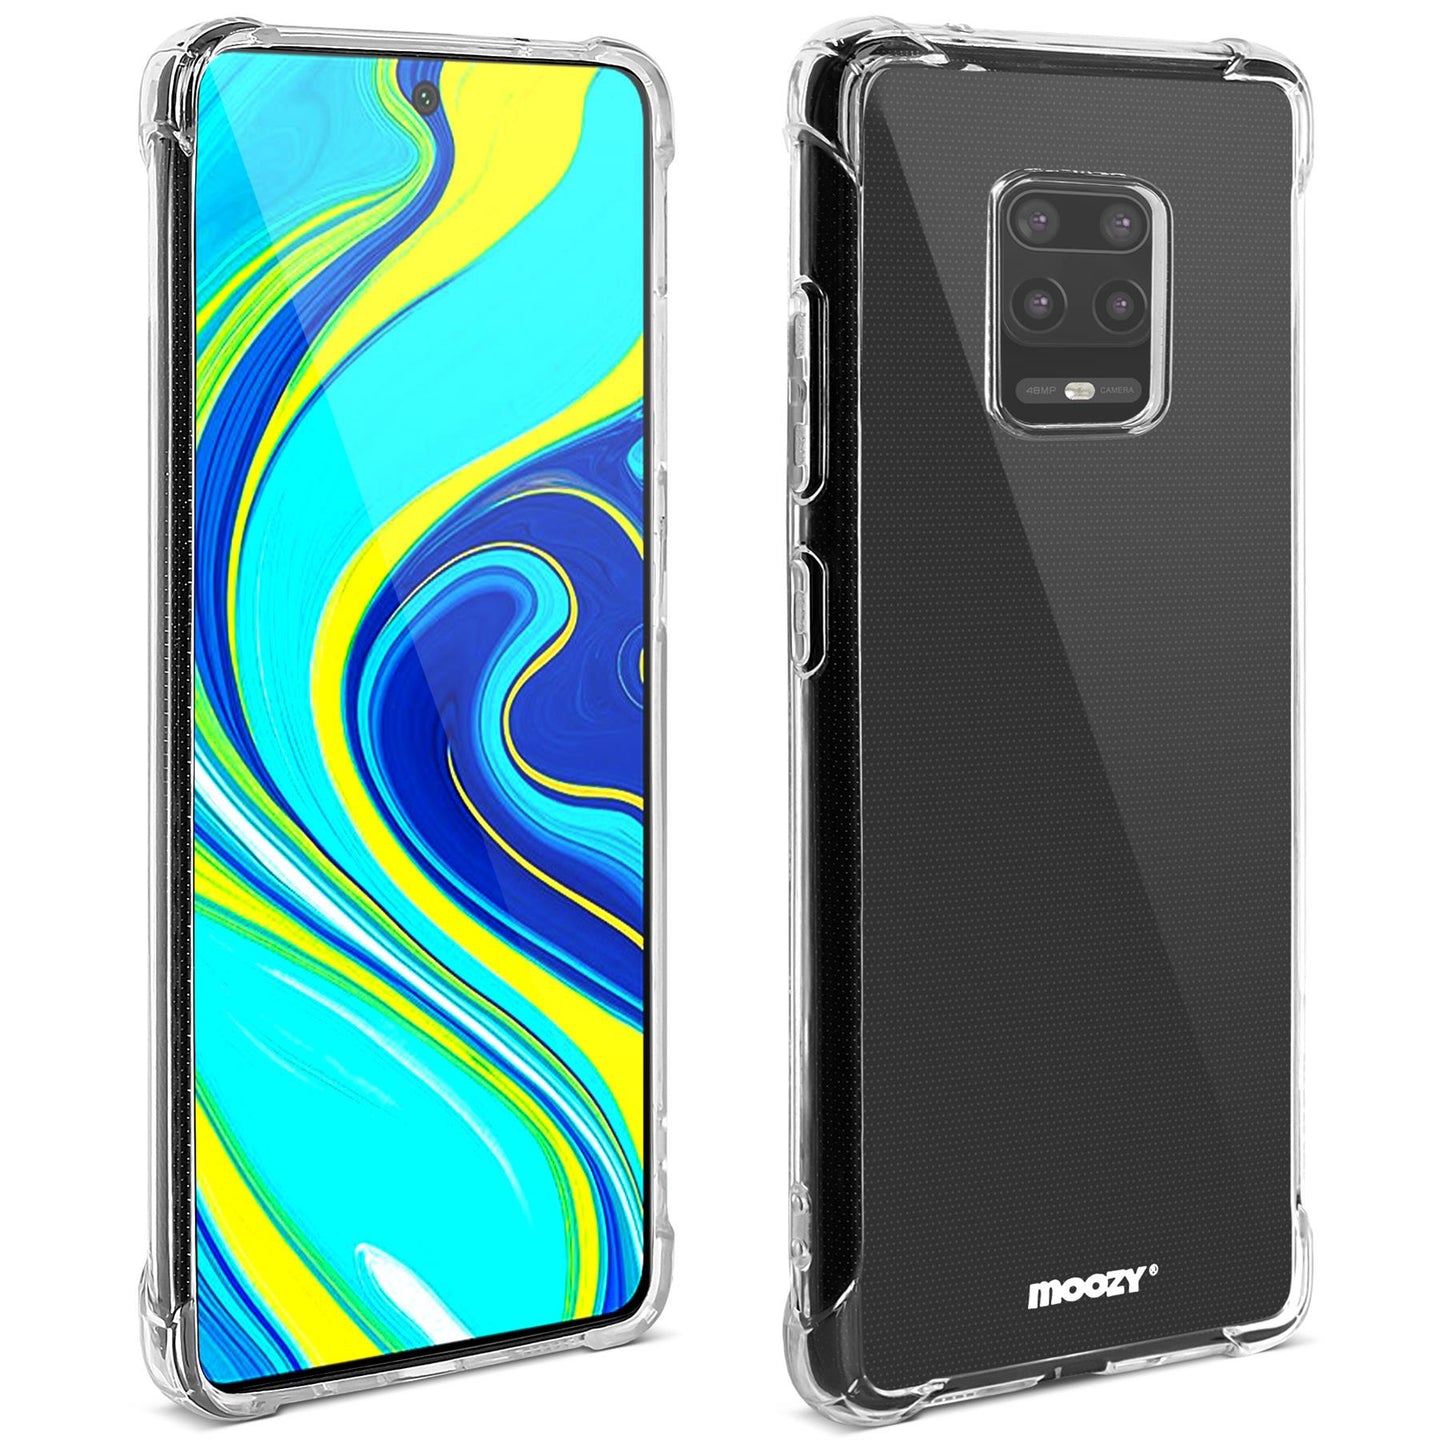 Moozy Shock Proof Silicone Case for Xiaomi Redmi Note 9S and Xiaomi Redmi Note 9 Pro - Transparent Crystal Clear Phone Case Soft TPU Cover